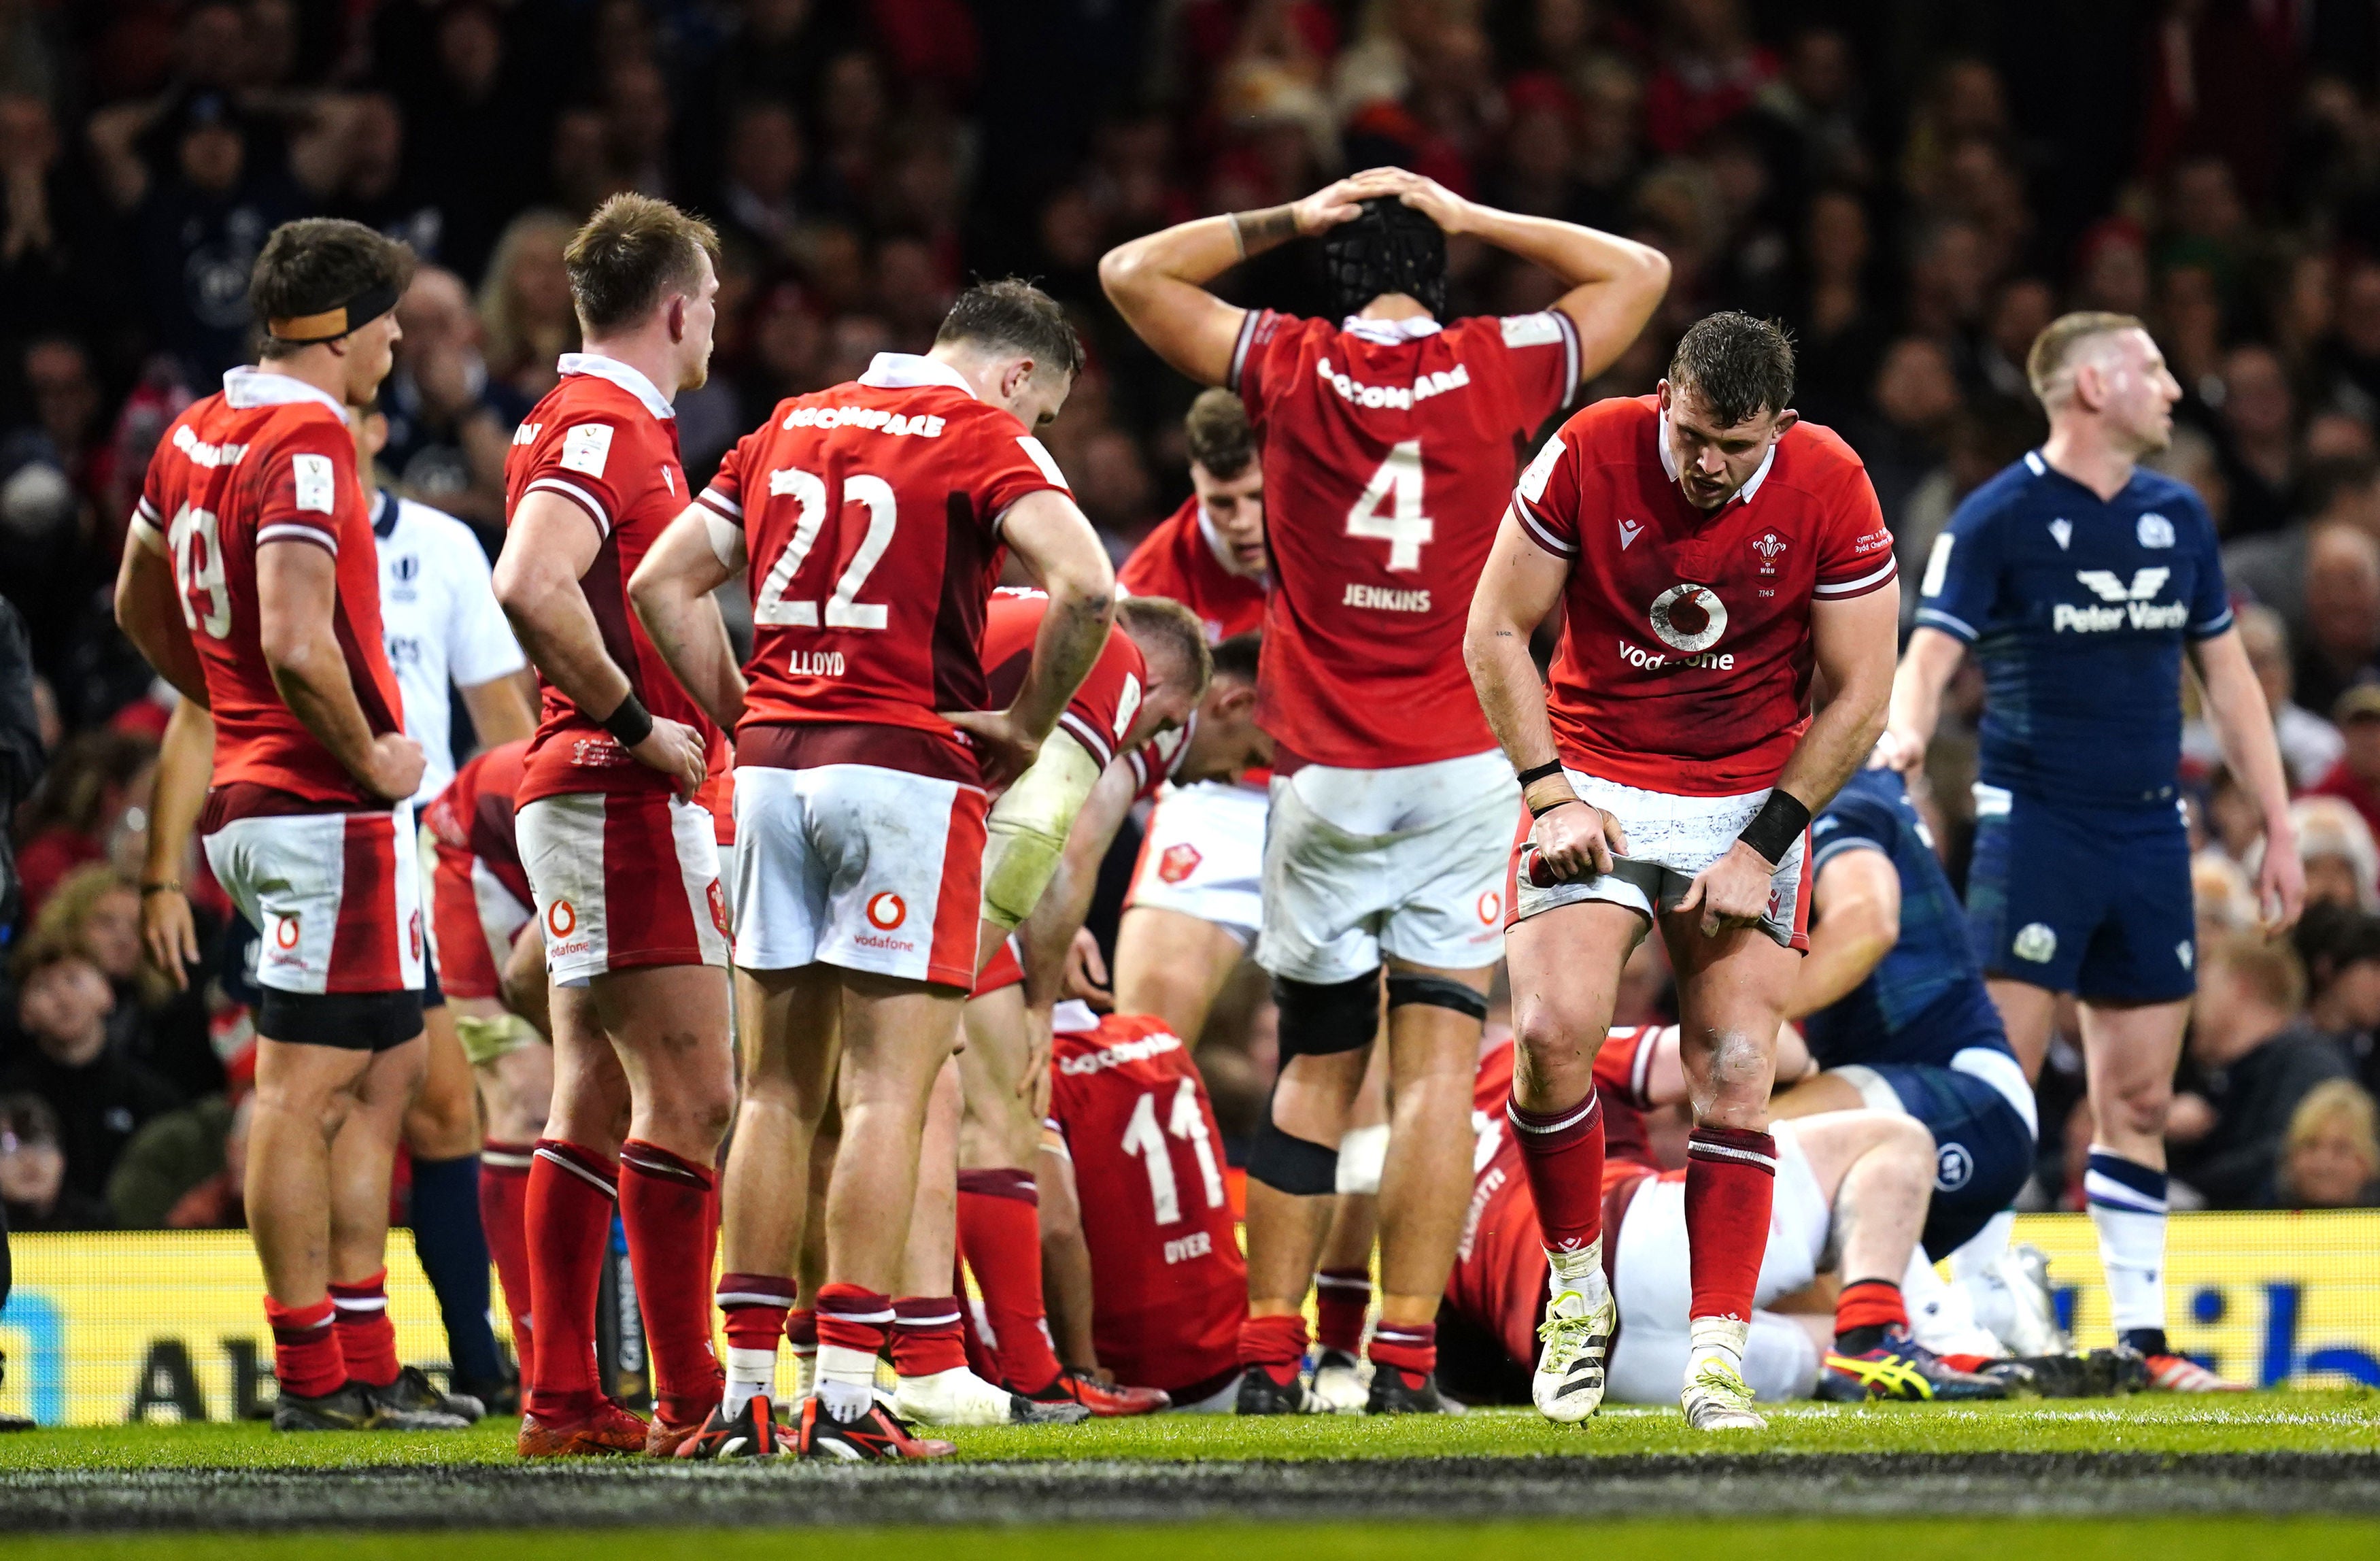 Wales have suffered heartbreaking defeats in their first two games